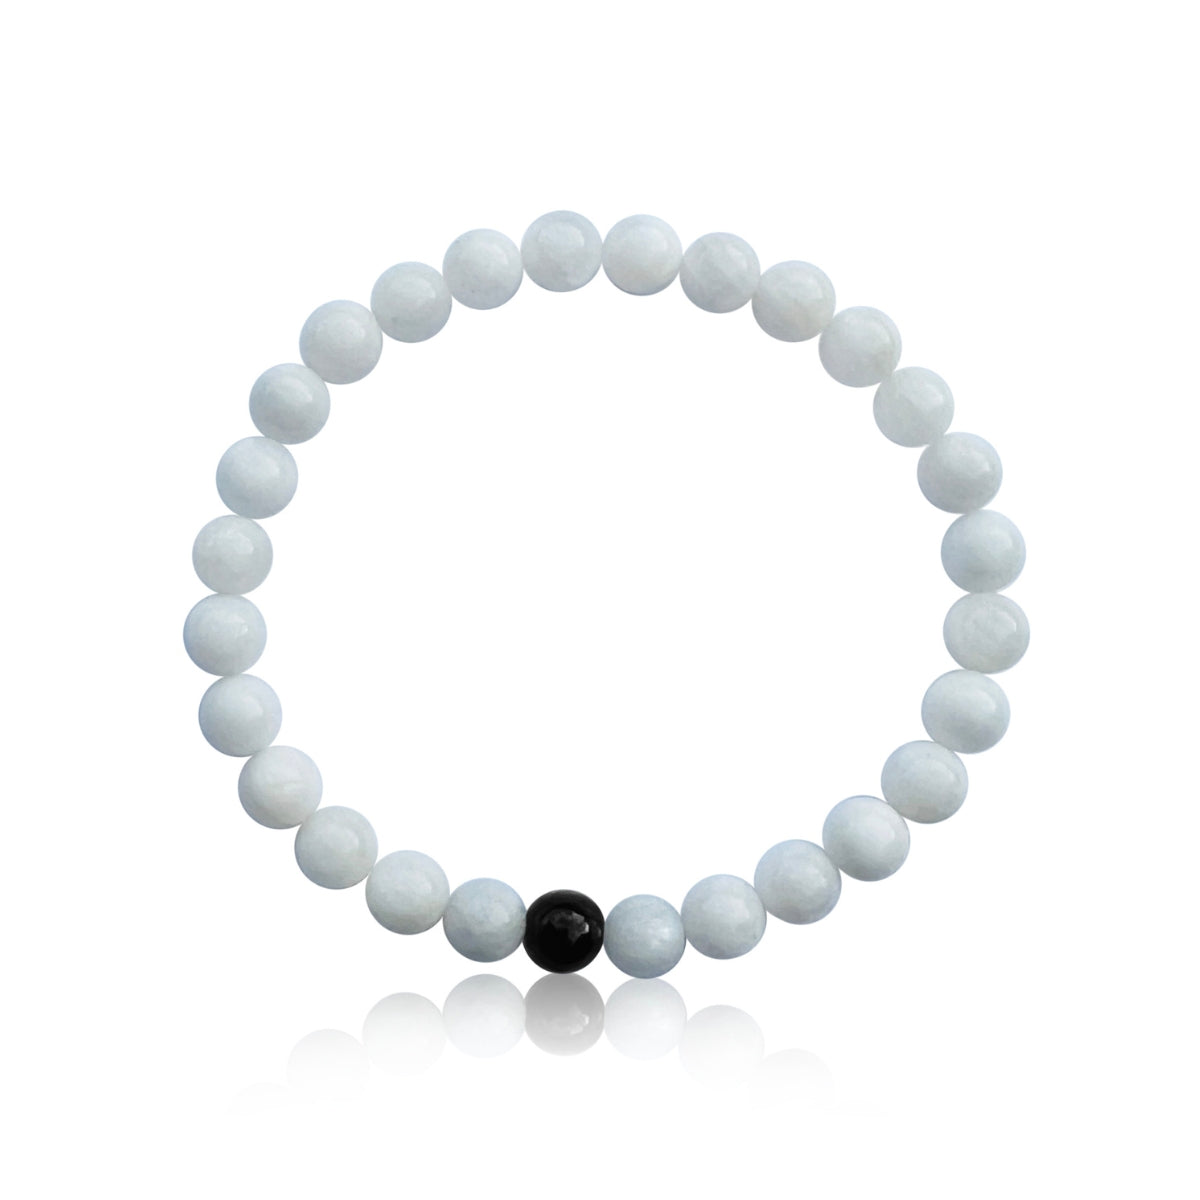 “Peace comes from within. Do not seek it without.” - Buddha. Wear this Transformation Moonstone Bracelet to help find your inner peace. A stone for “new beginnings”, Moonstone is a stone of inner growth and strength.  